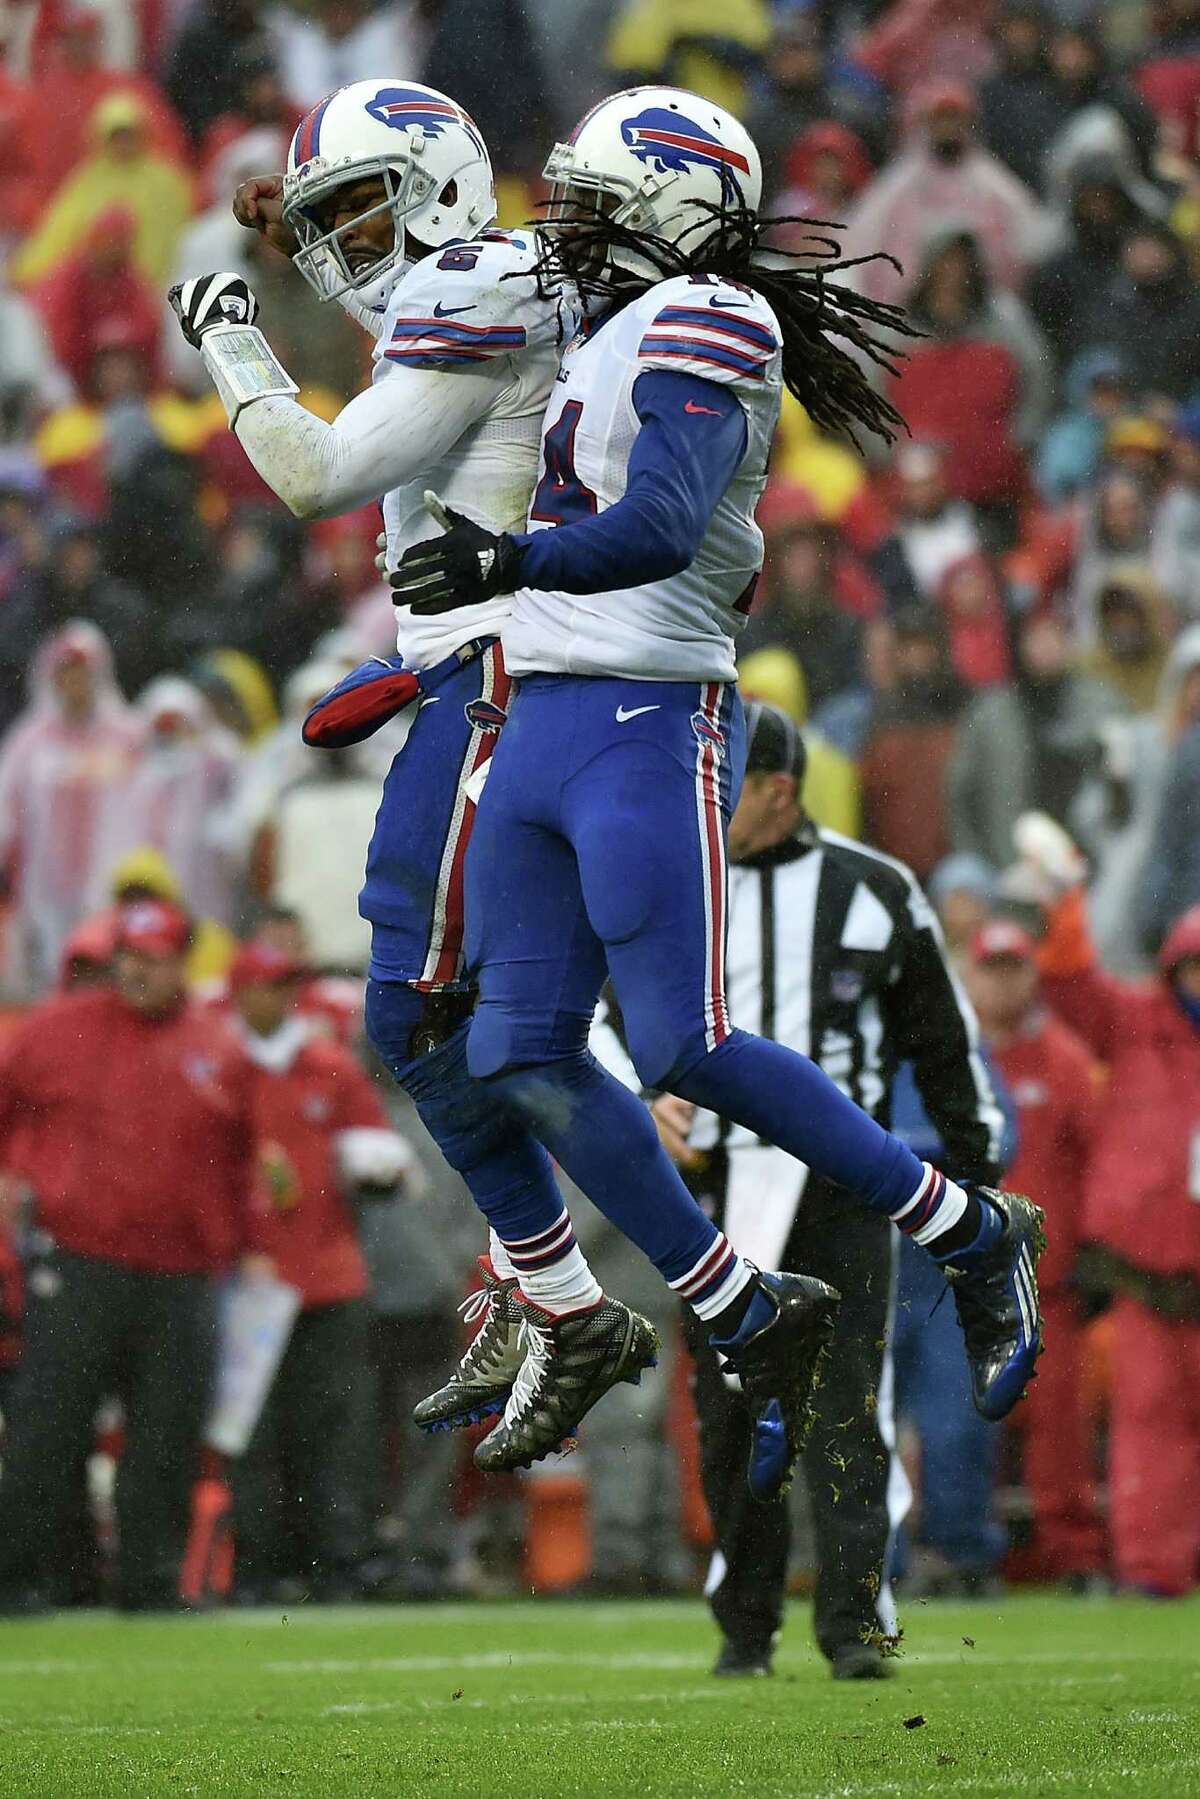 KANSAS CITY, MO - NOVEMBER 29: Sammy Watkins #14 of the Buffalo Bills celebrates with teammate Tyrod Taylor #5 after a touchdown reception at Arrowhead Stadium during the second quarter of the game against the Kansas City Chiefs on November 29, 2015 in Kansas City, Missouri. (Photo by Peter Aiken/Getty Images)